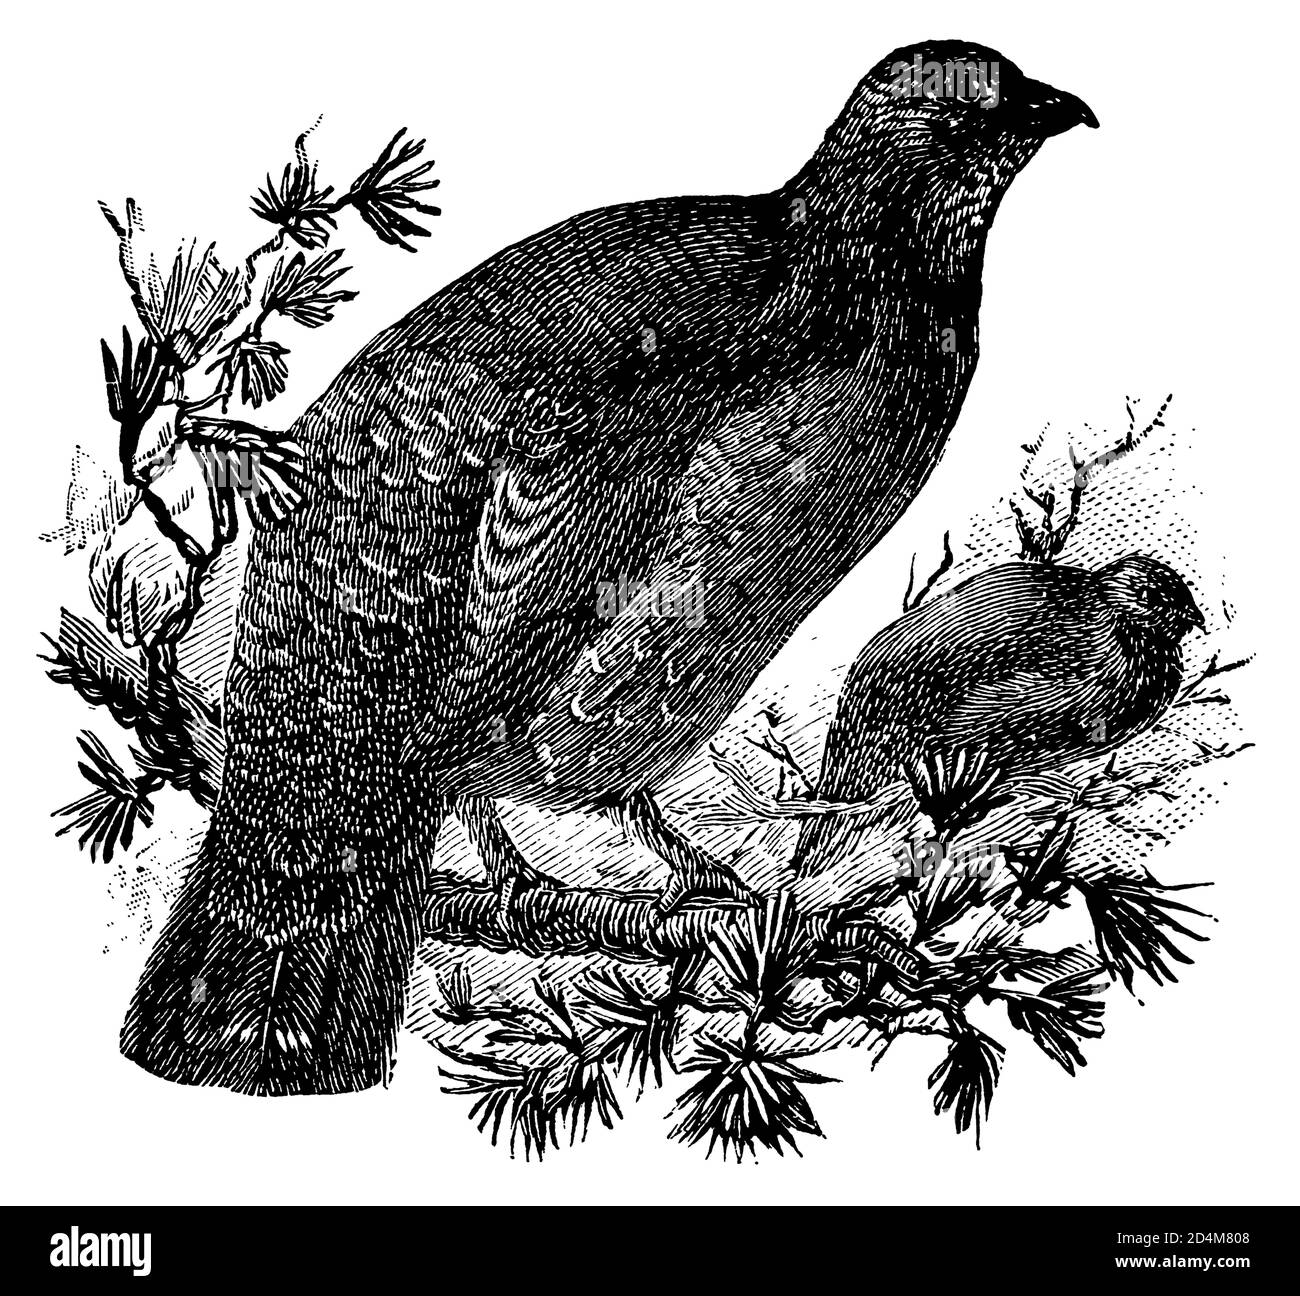 Antique engraving of a dusky grouse (isolated on white). Published in Systematischer Bilder-Atlas zum Conversations-Lexikon, Ikonographische Encyklopa Stock Photo